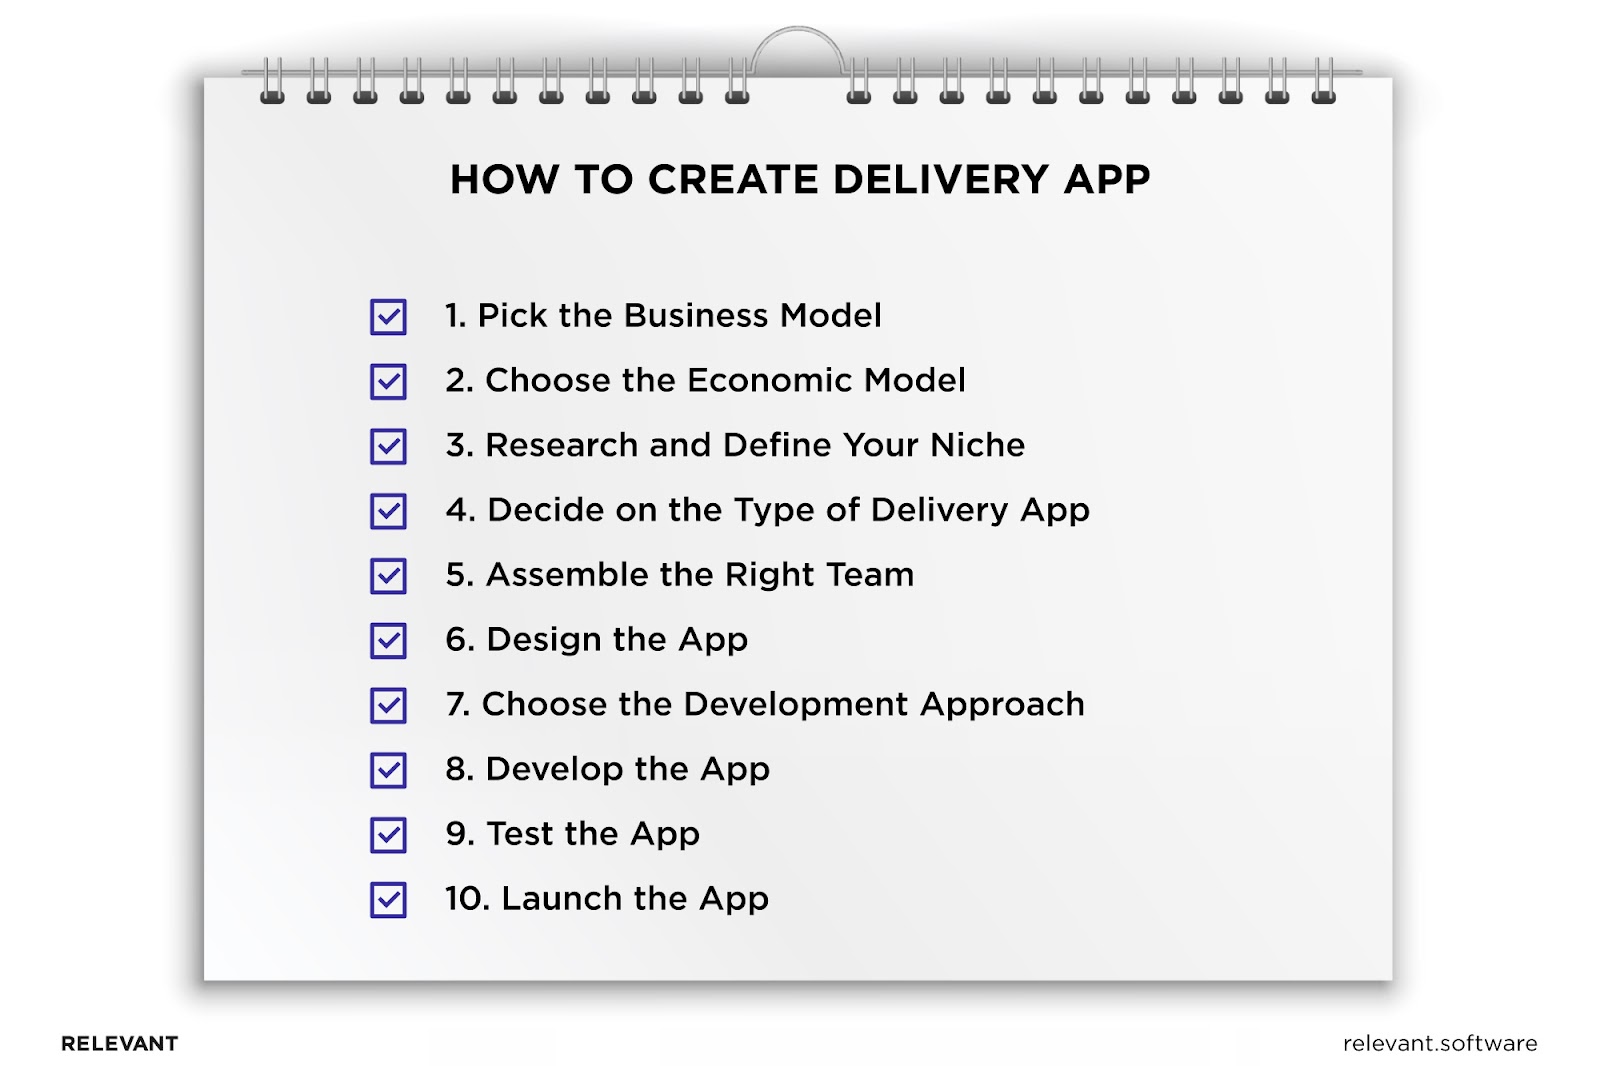  How to create a delivery app